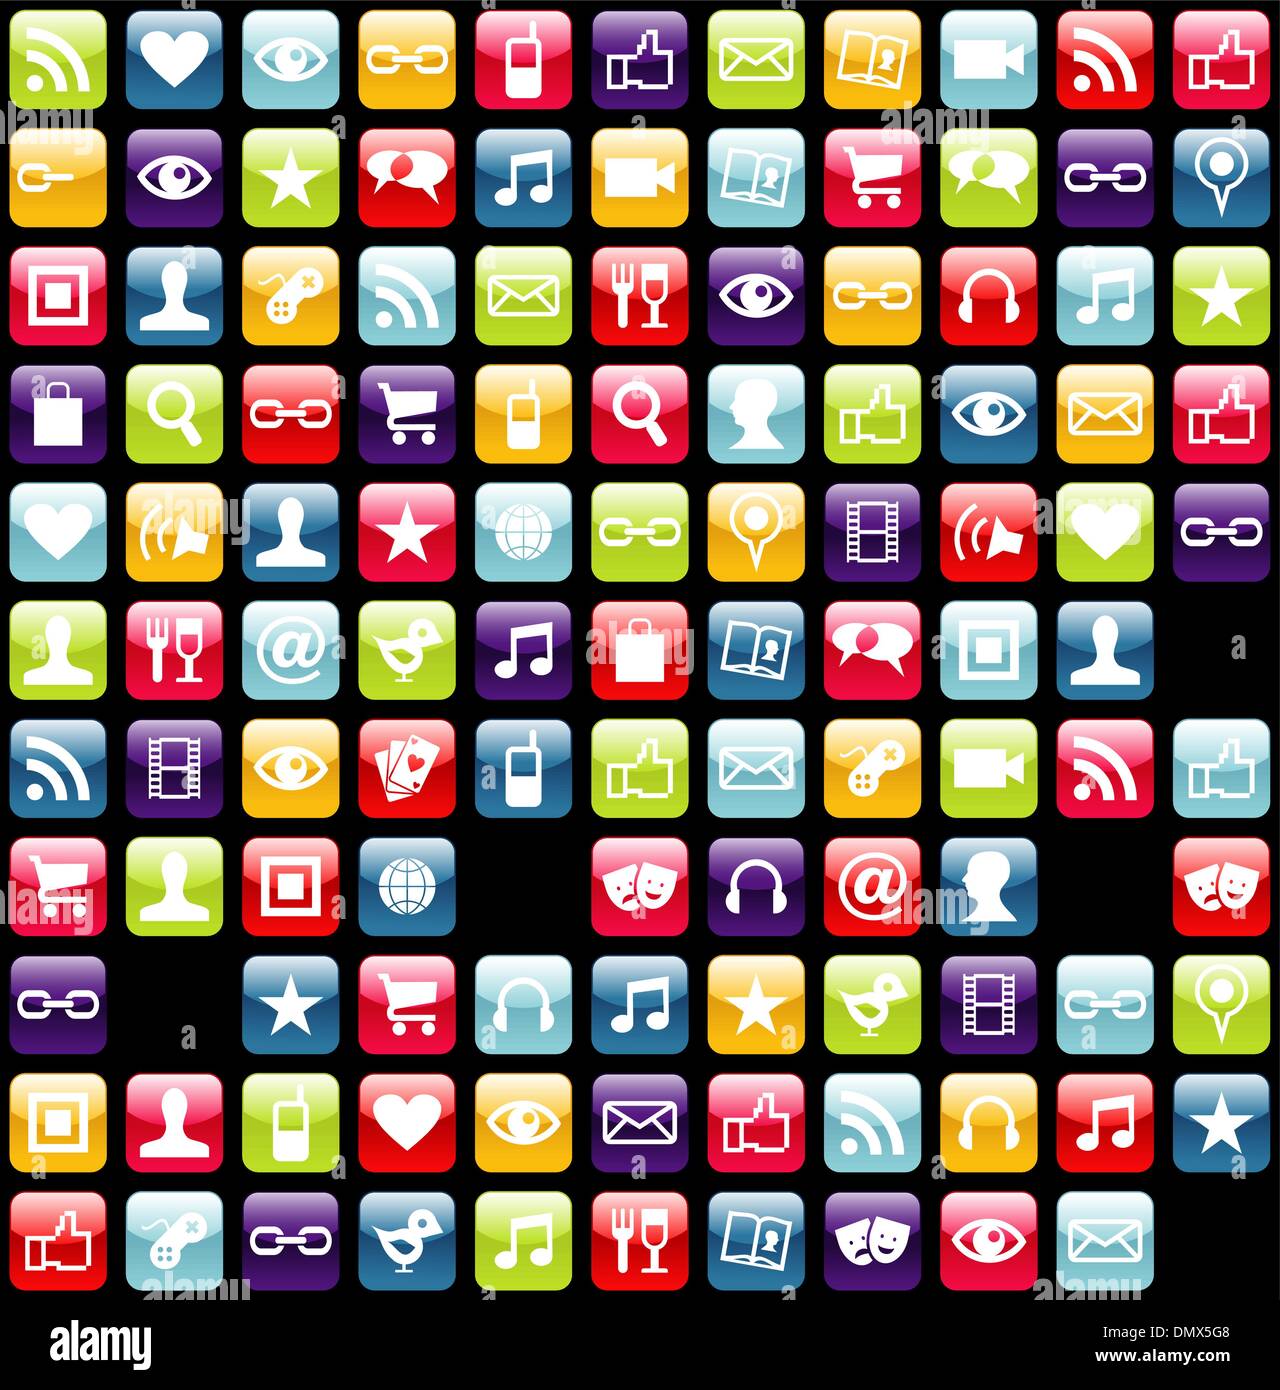 Mobile Phone App Icons Pattern Background Stock Vector Image Art Alamy